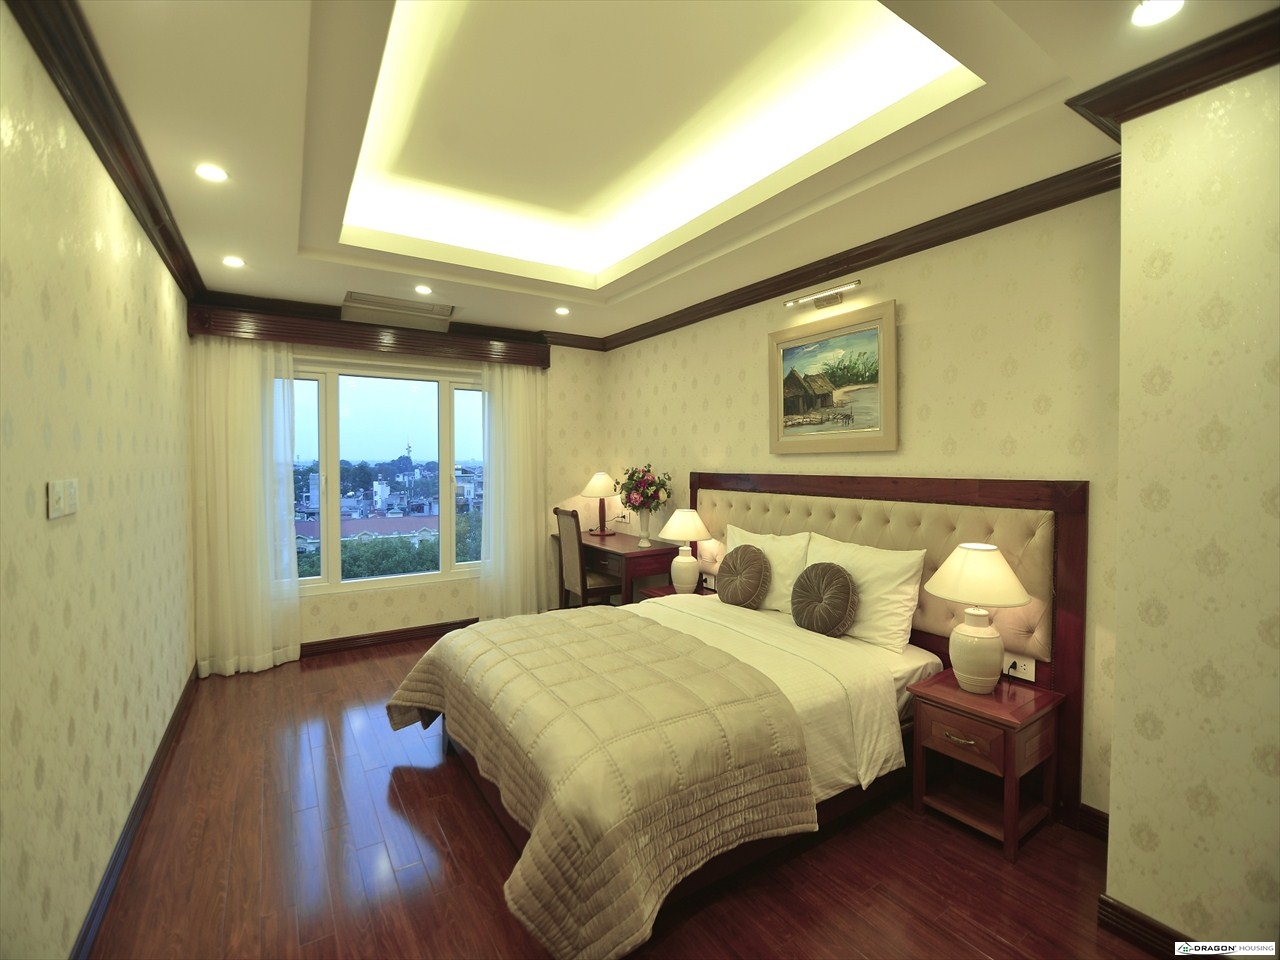 two-bedroom-apartment-master-bedroom_r